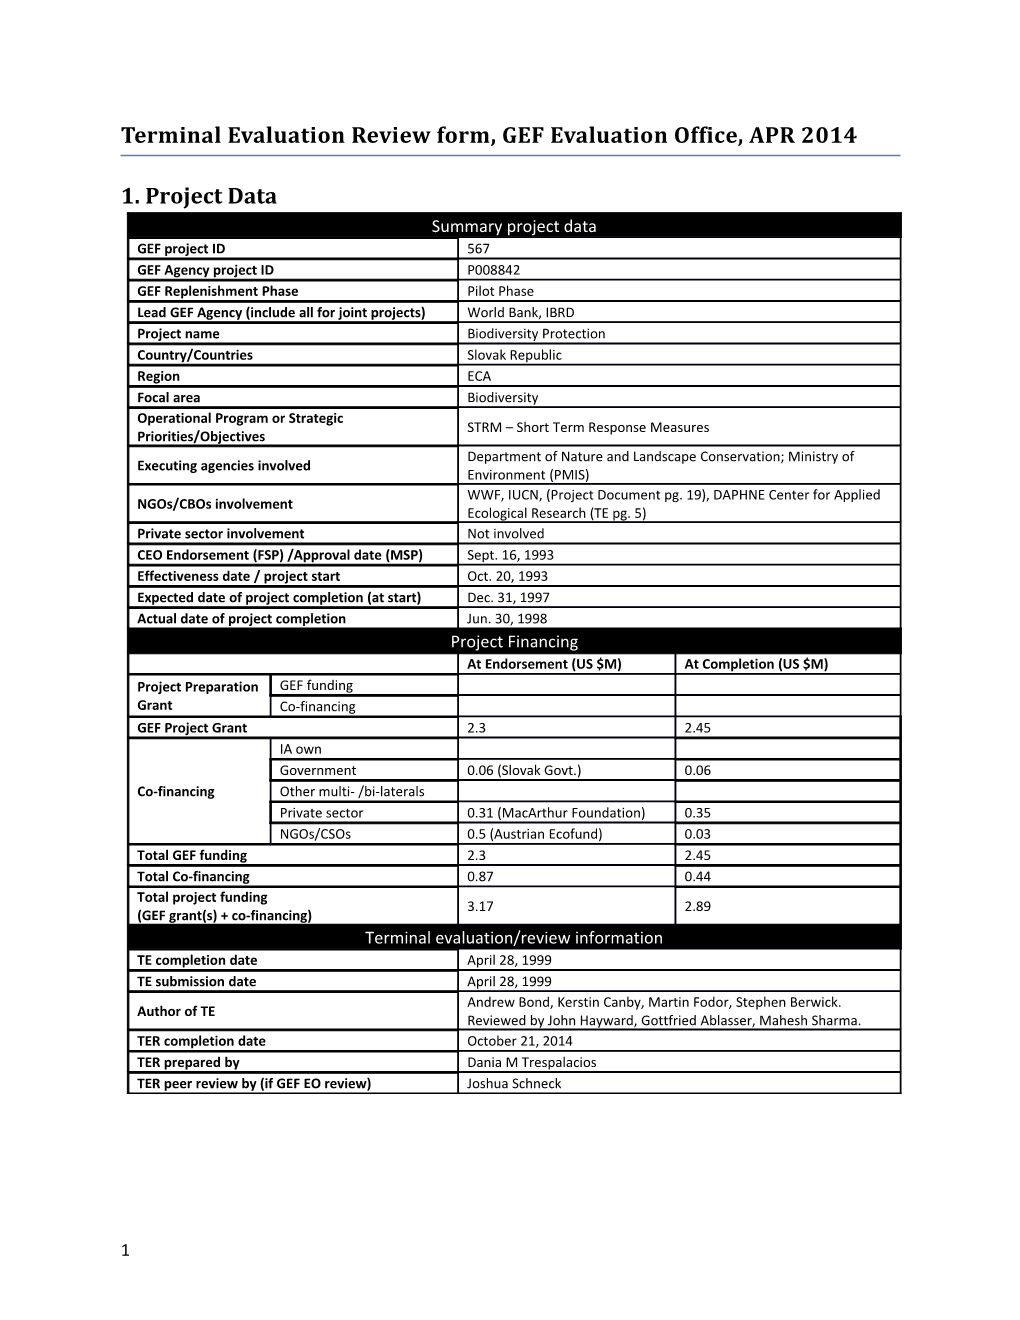 Terminal Evaluation Review Form, GEF Evaluation Office, APR 2014